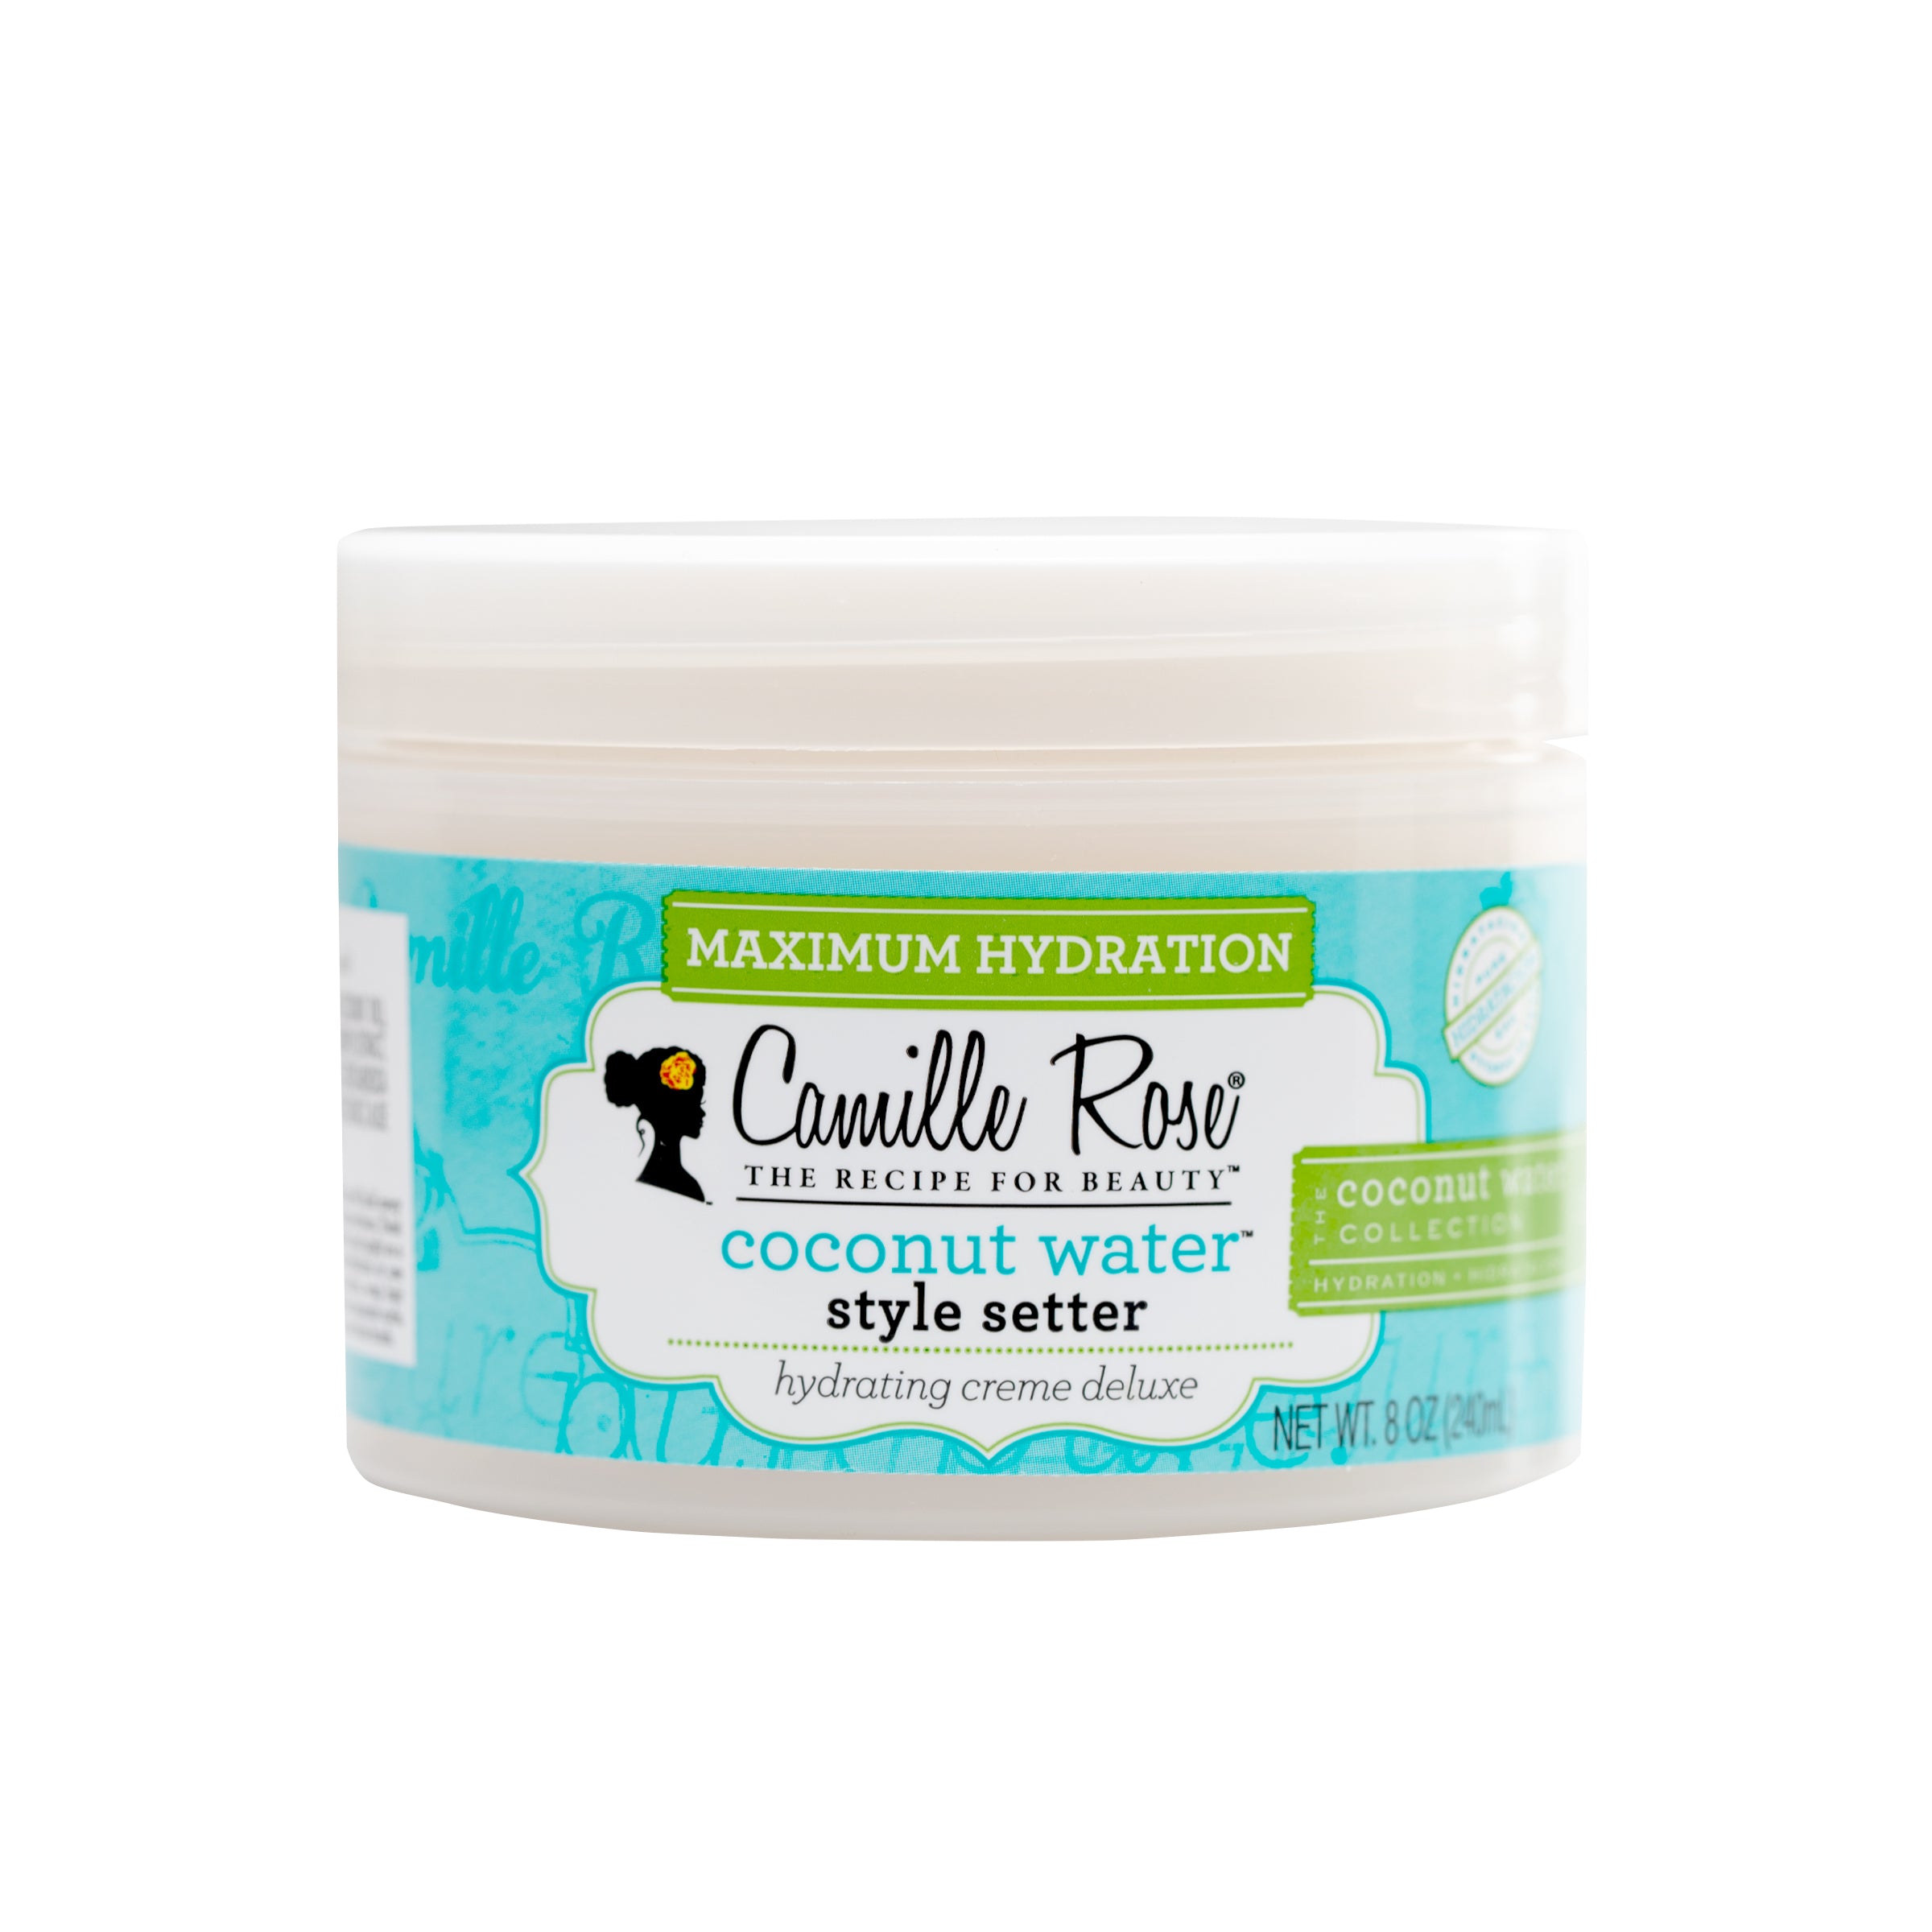 Camille Rose Coconut Water Style Setter Hydrating Creme Deluxe